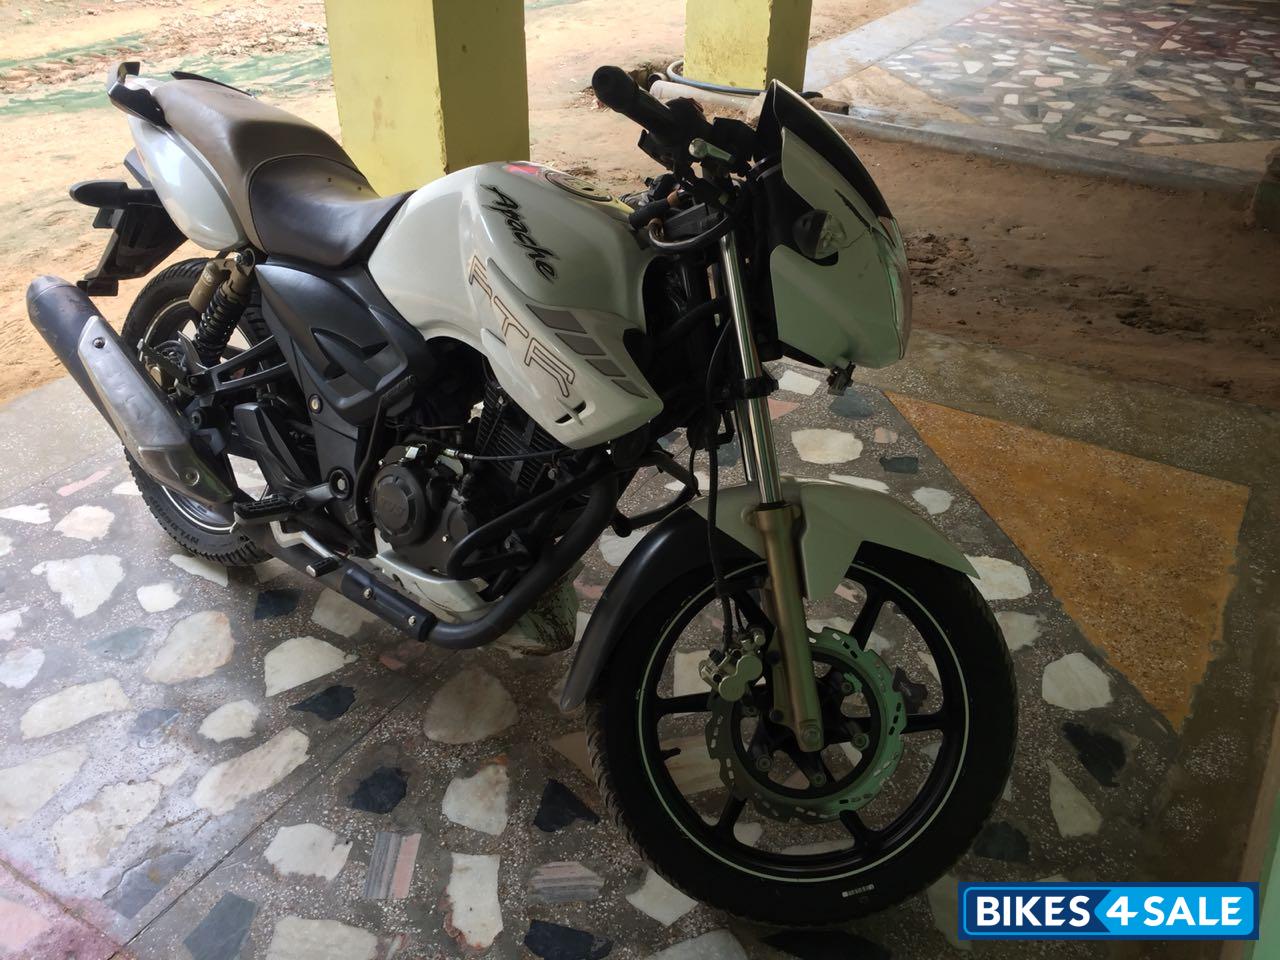 Used 2015 model TVS Apache RTR 180 for sale in Gurgaon. ID ...